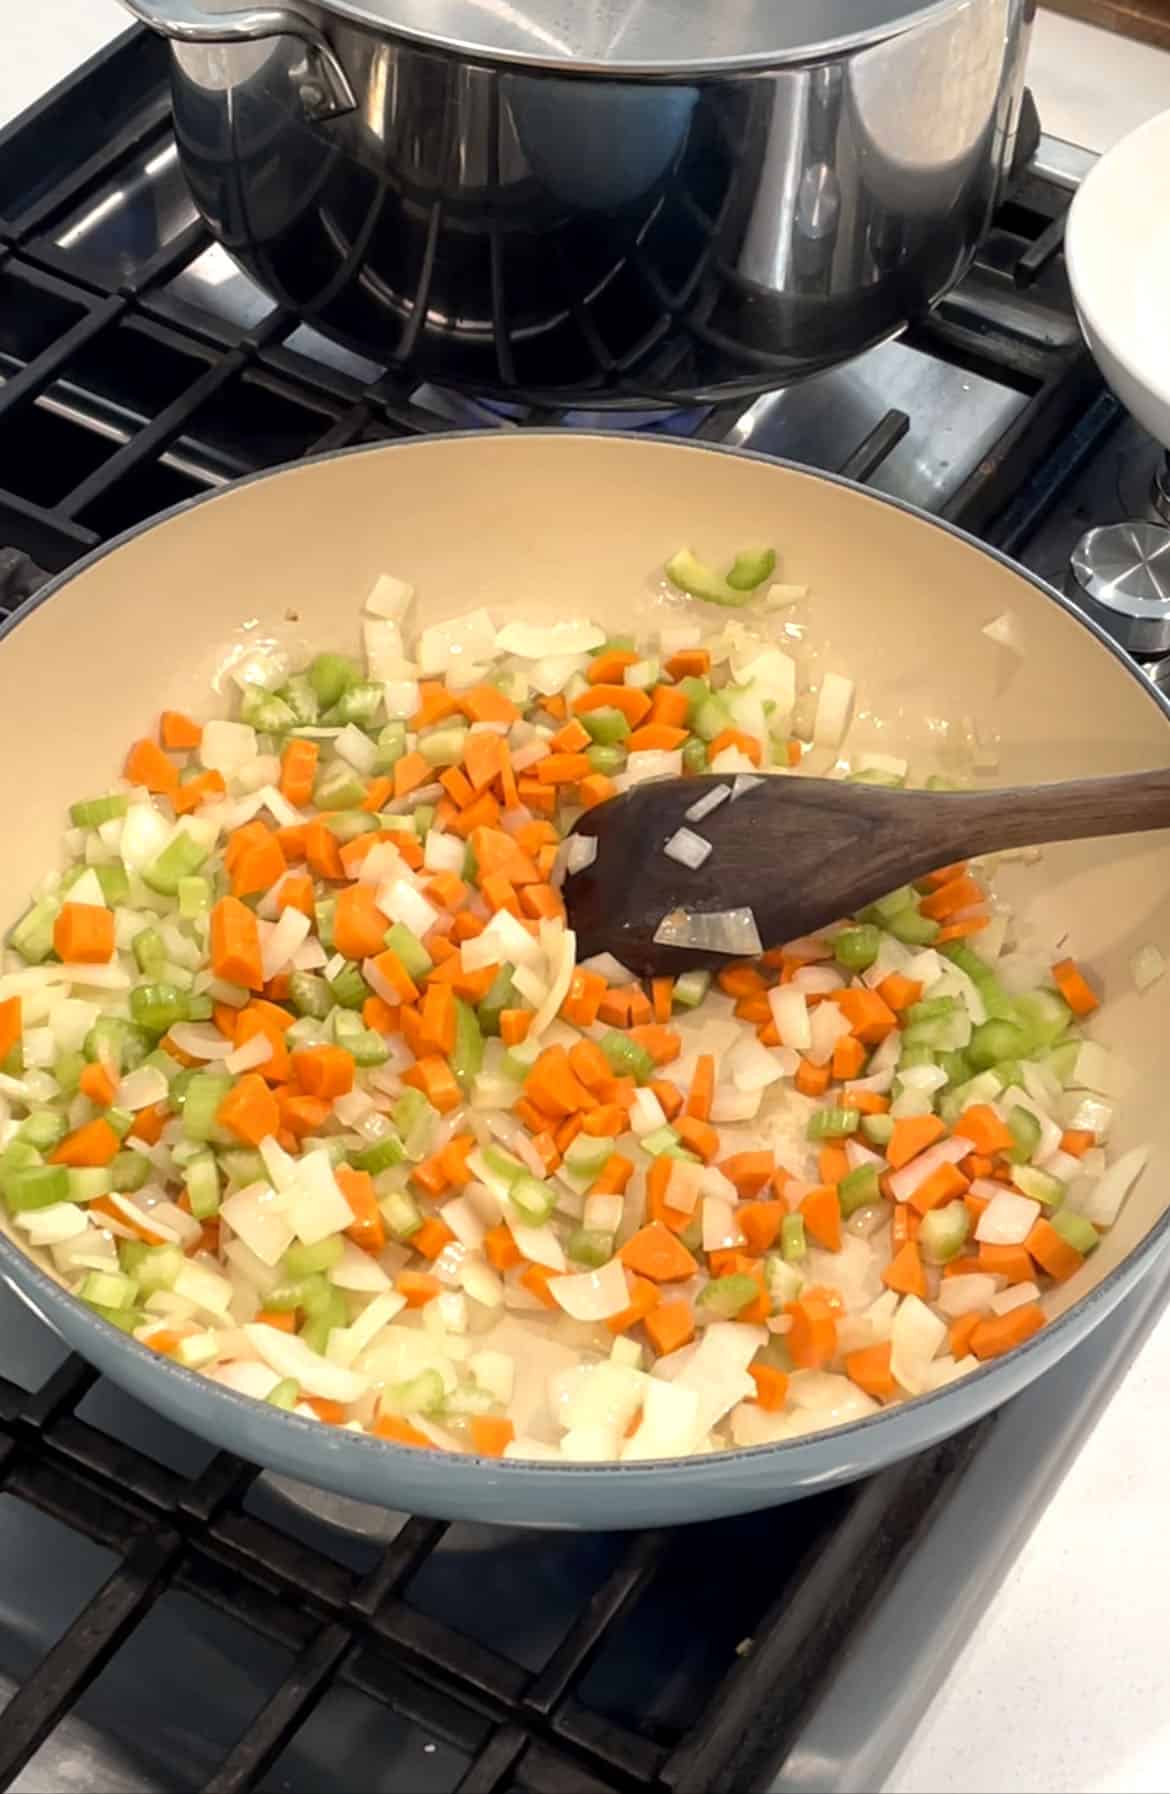 Large skillet with sautéed onions, carrots, and celery with a wooden spatula. 